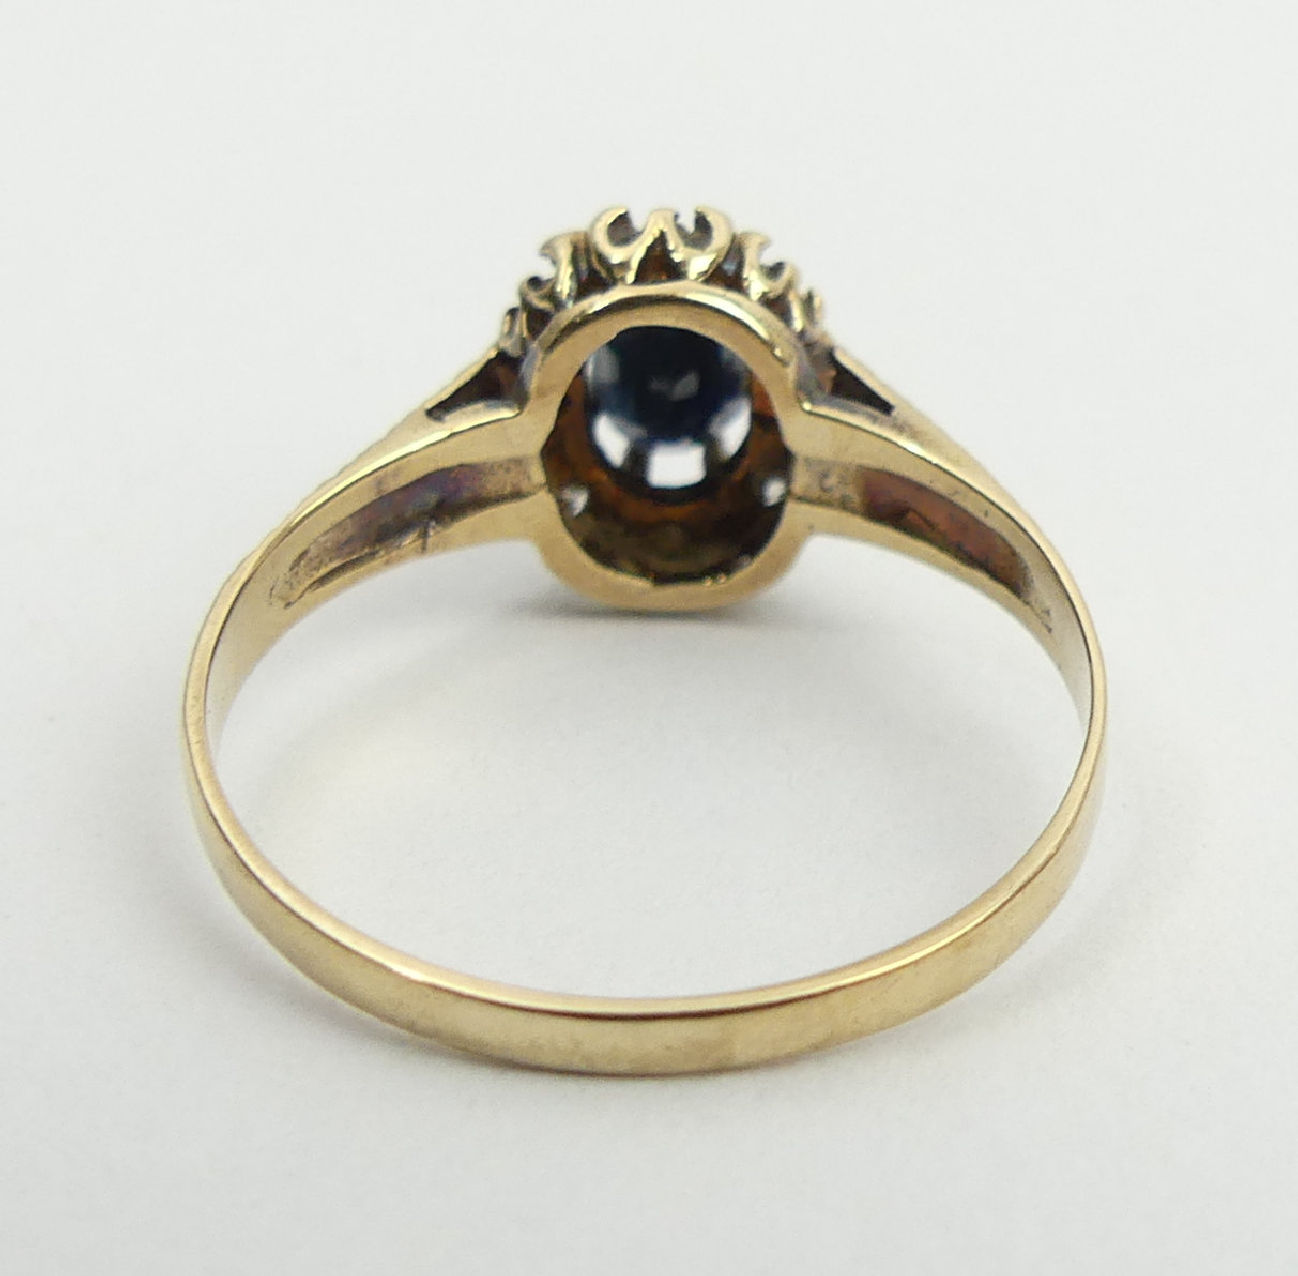 9ct gold sapphire and diamond ring, Birm. 1985, 1.8 grams, 10.2mm, size P1/2. UK postage £12. - Image 5 of 6